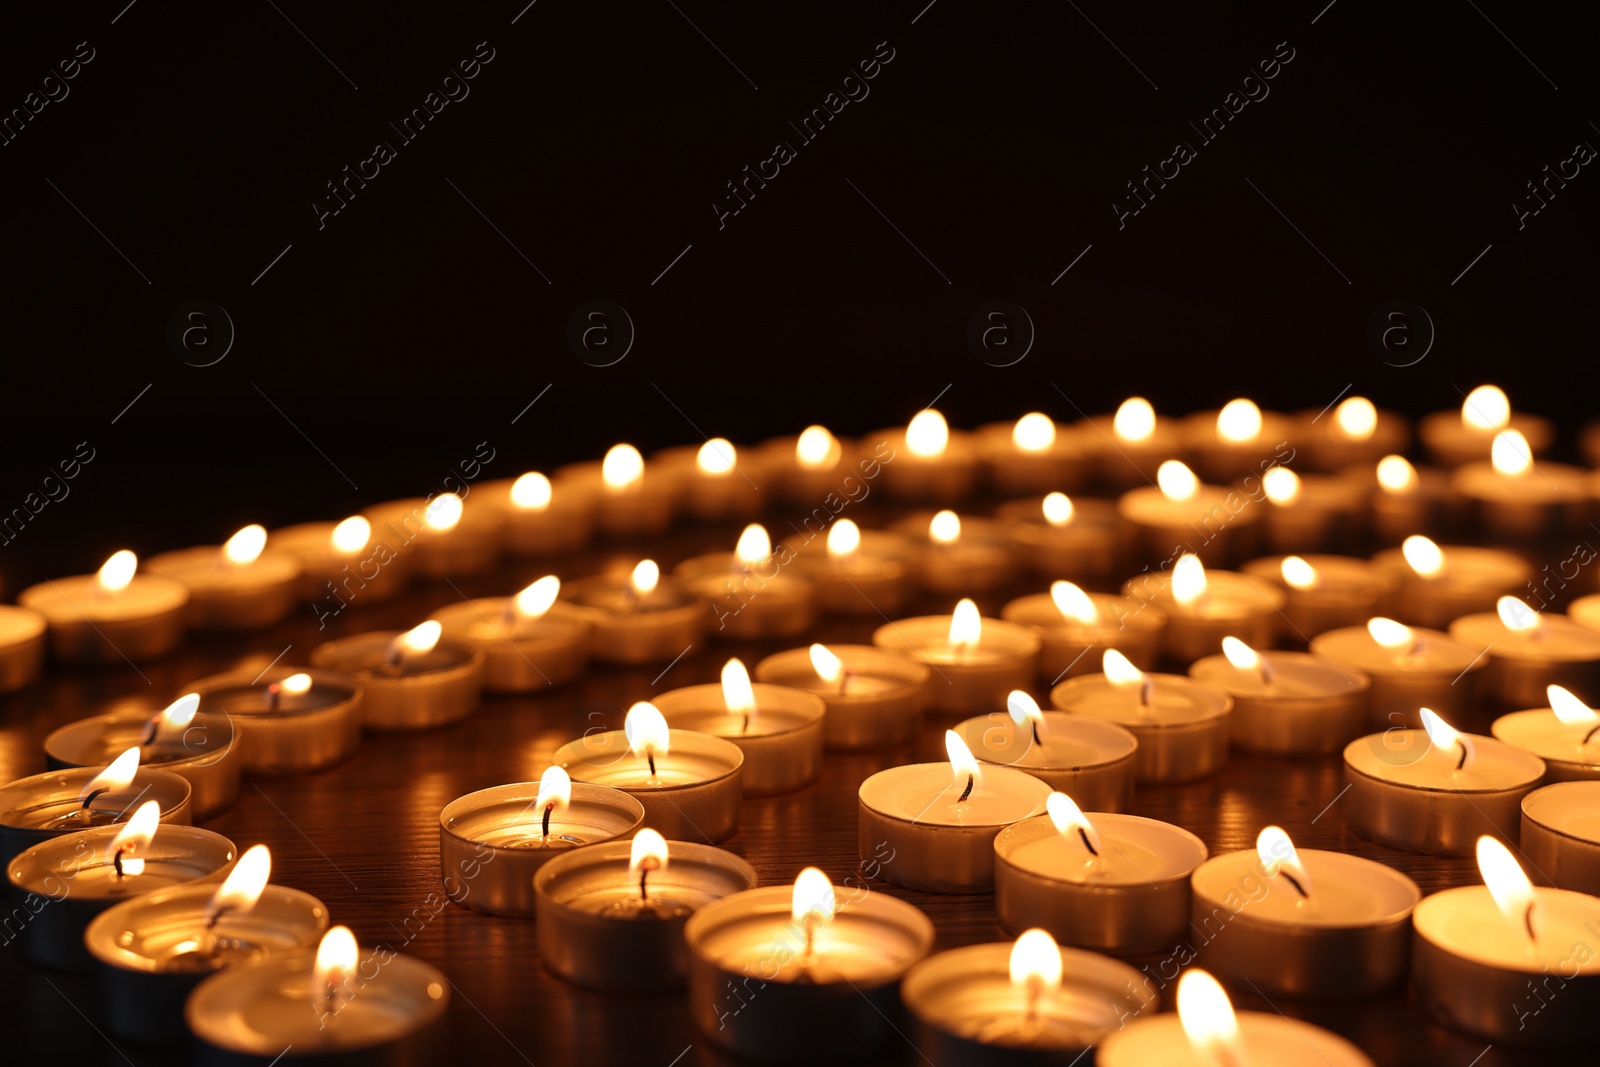 Photo of Burning candles on wooden table against black background